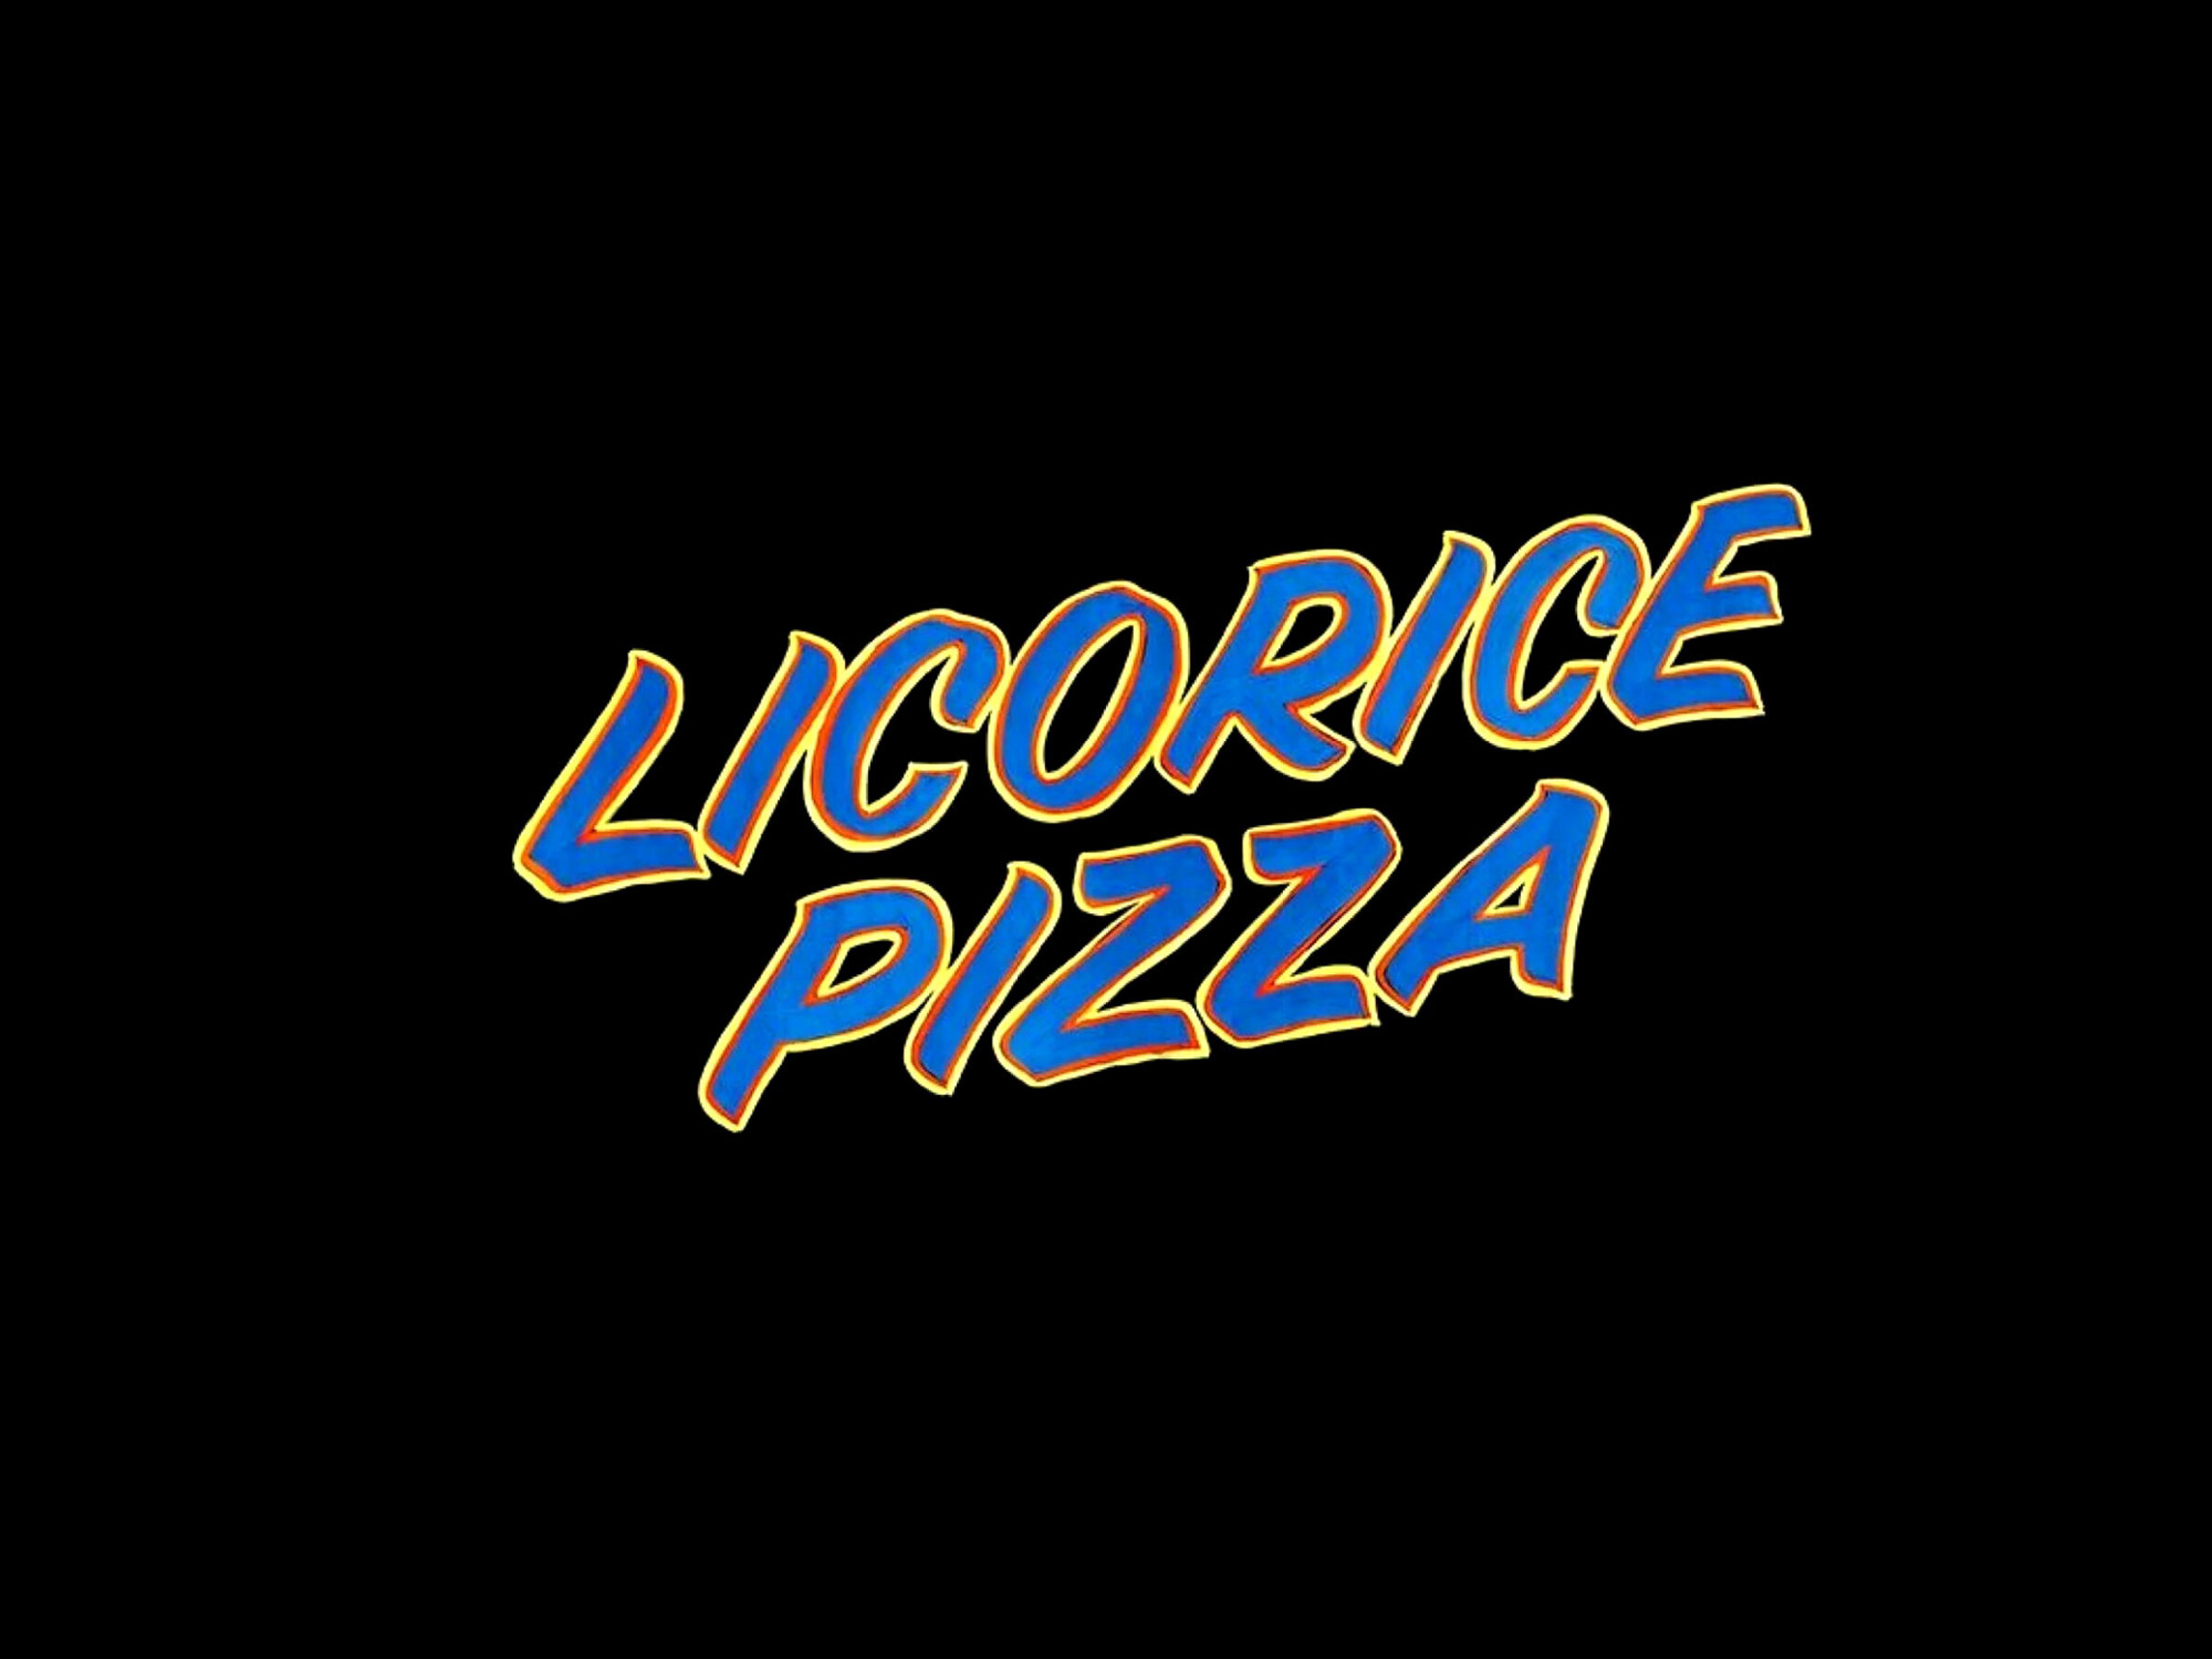 Does 'Licorice Pizza' prove Paul Thomas Anderson is racist?